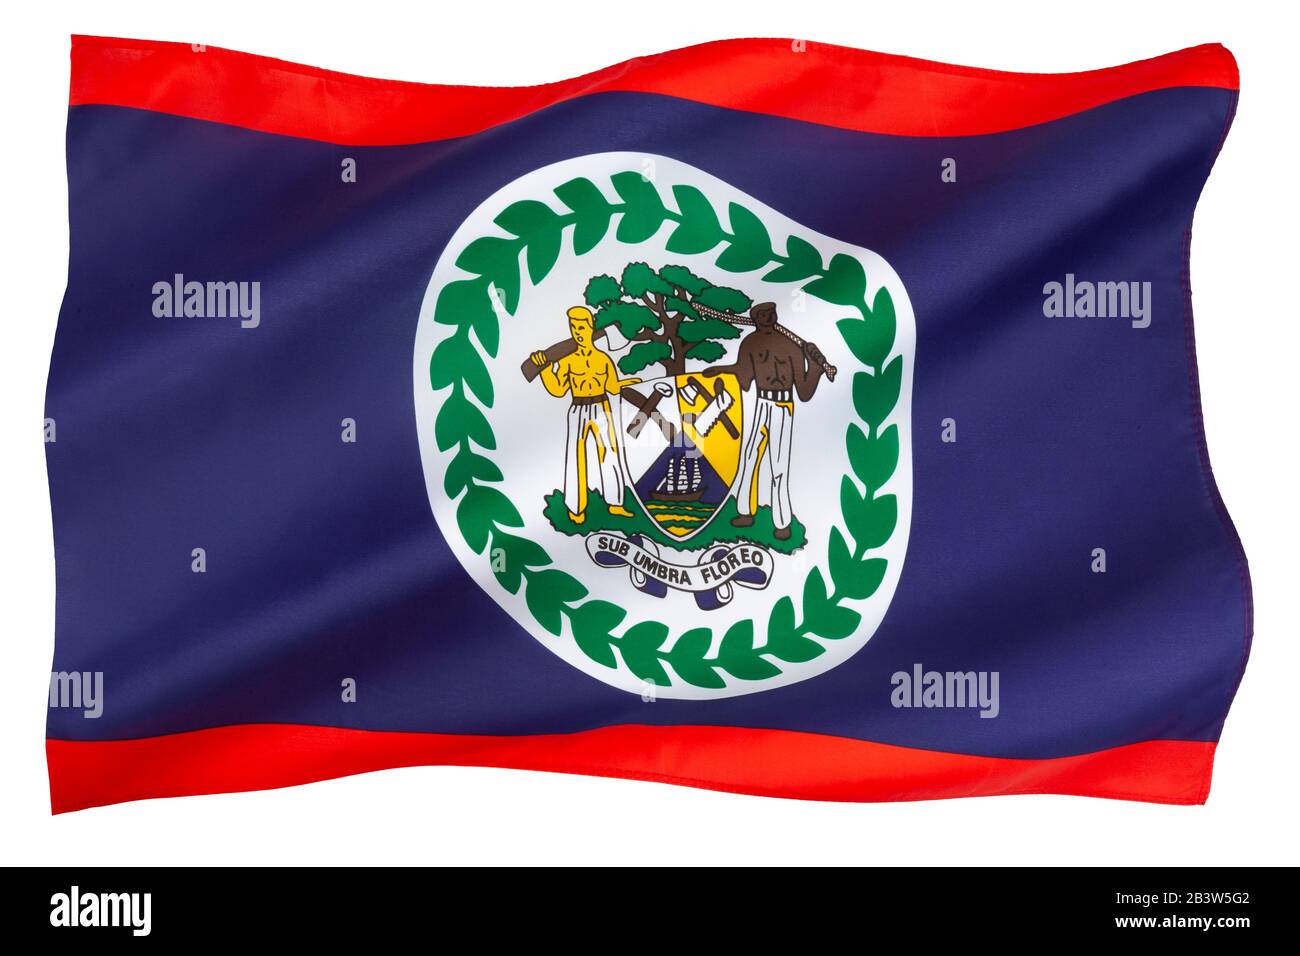 The flag of Belize - adopted on 21 September 1981, the day Belize became independent. Stock Photo